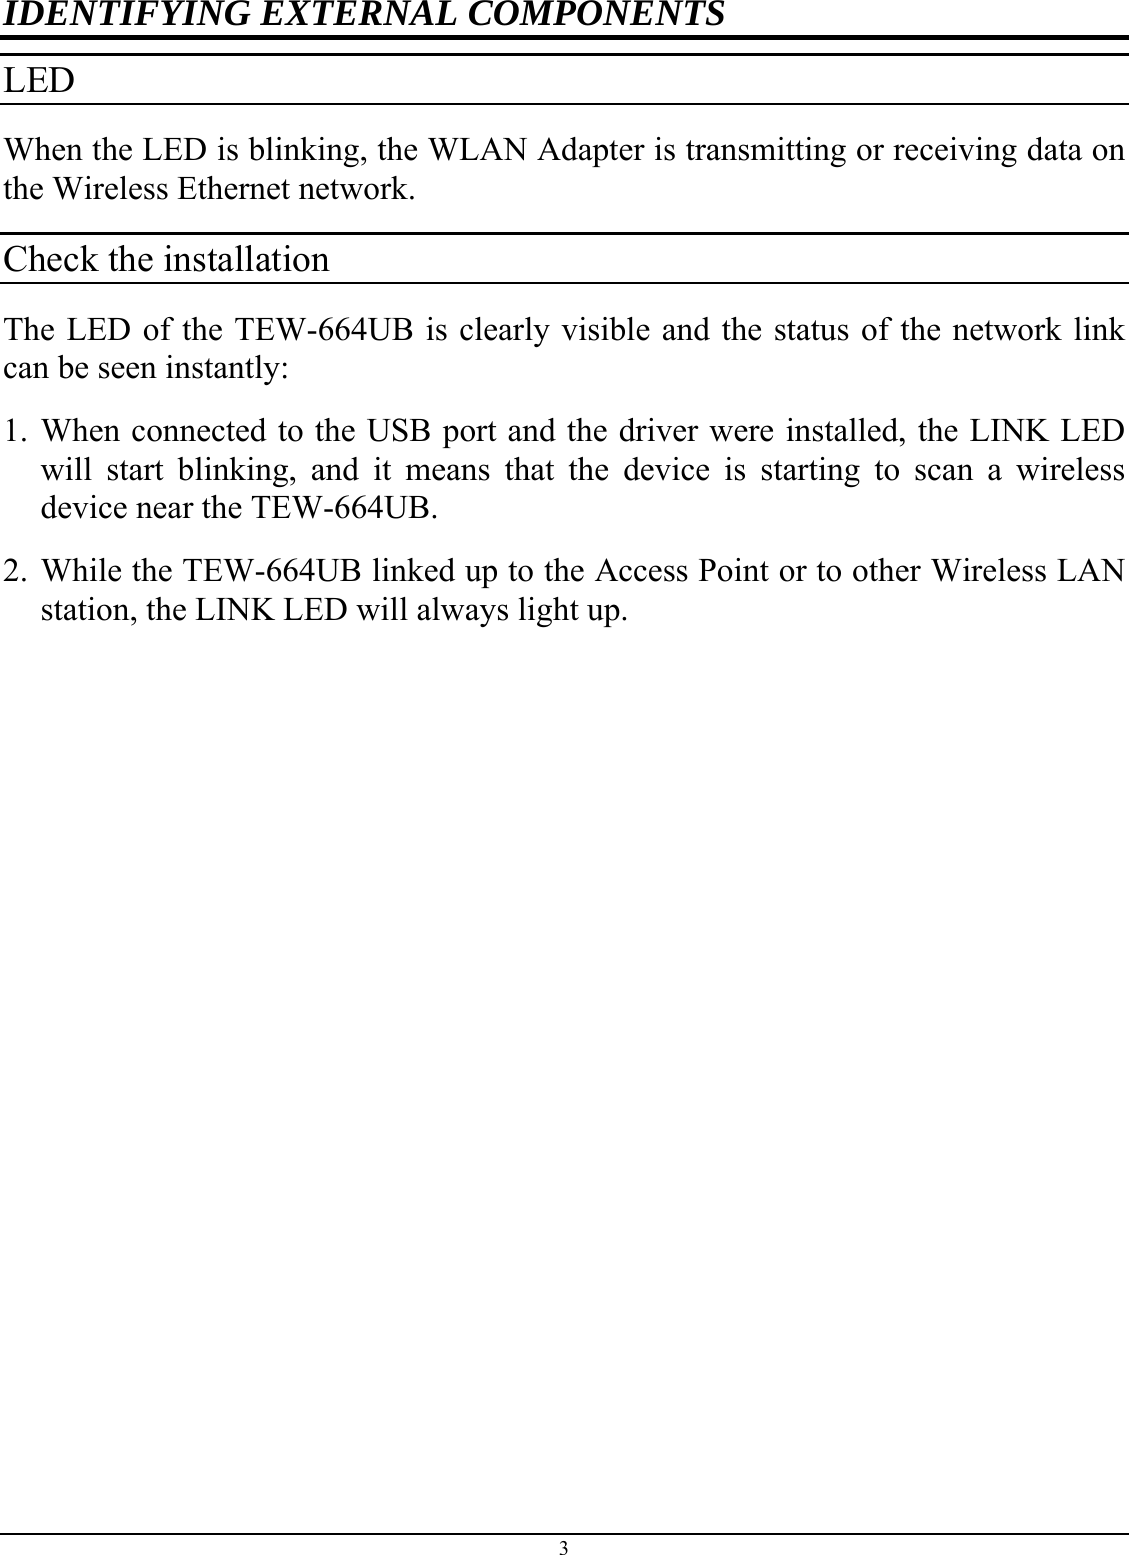 IDENTIFYING EXTERNAL COMPONENTS LED  When the LED is blinking, the WLAN Adapter is transmitting or receiving data on the Wireless Ethernet network. Check the installation The LED of the TEW-664UB is clearly visible and the status of the network link can be seen instantly: 1. When connected to the USB port and the driver were installed, the LINK LED will start blinking, and it means that the device is starting to scan a wireless device near the TEW-664UB. 2. While the TEW-664UB linked up to the Access Point or to other Wireless LAN station, the LINK LED will always light up.  3 